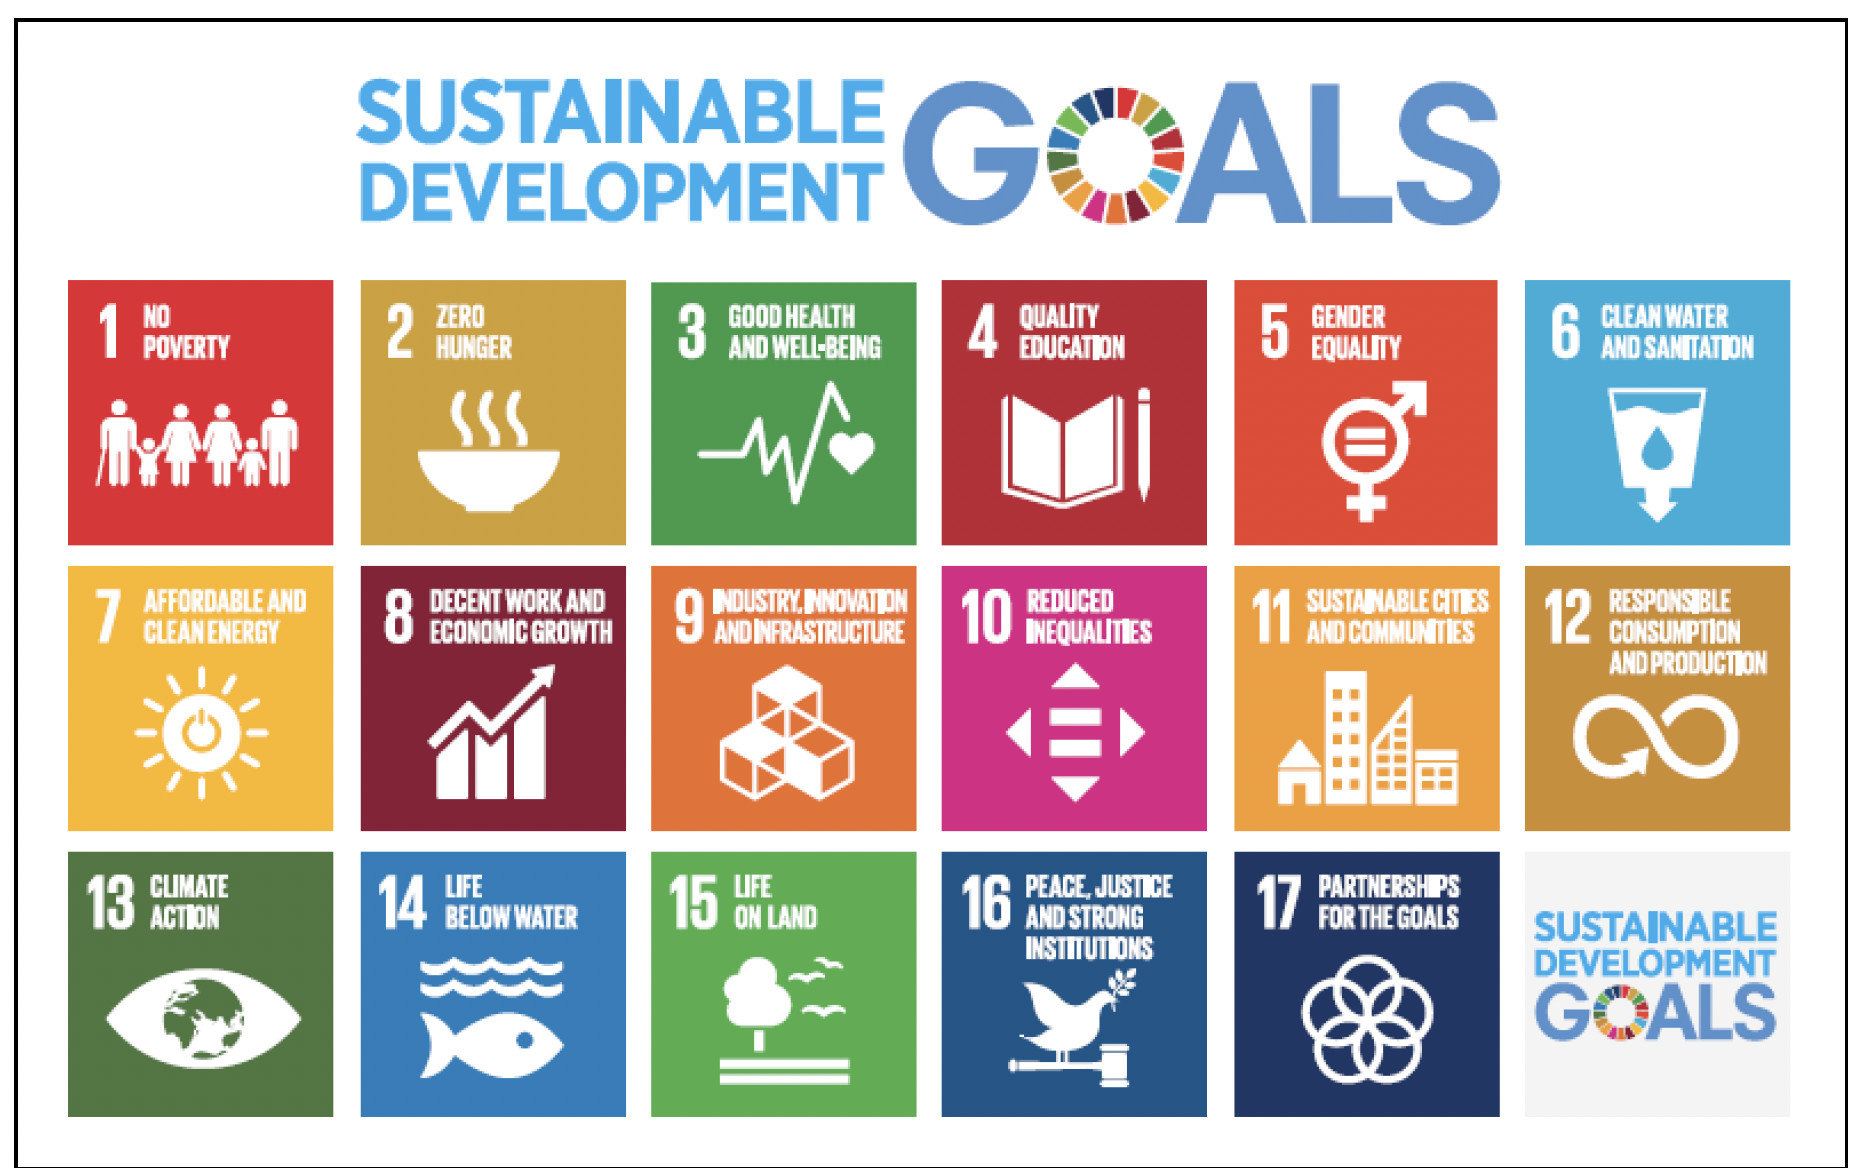 Image showing the 17 United Nations Sustainable Development Goals